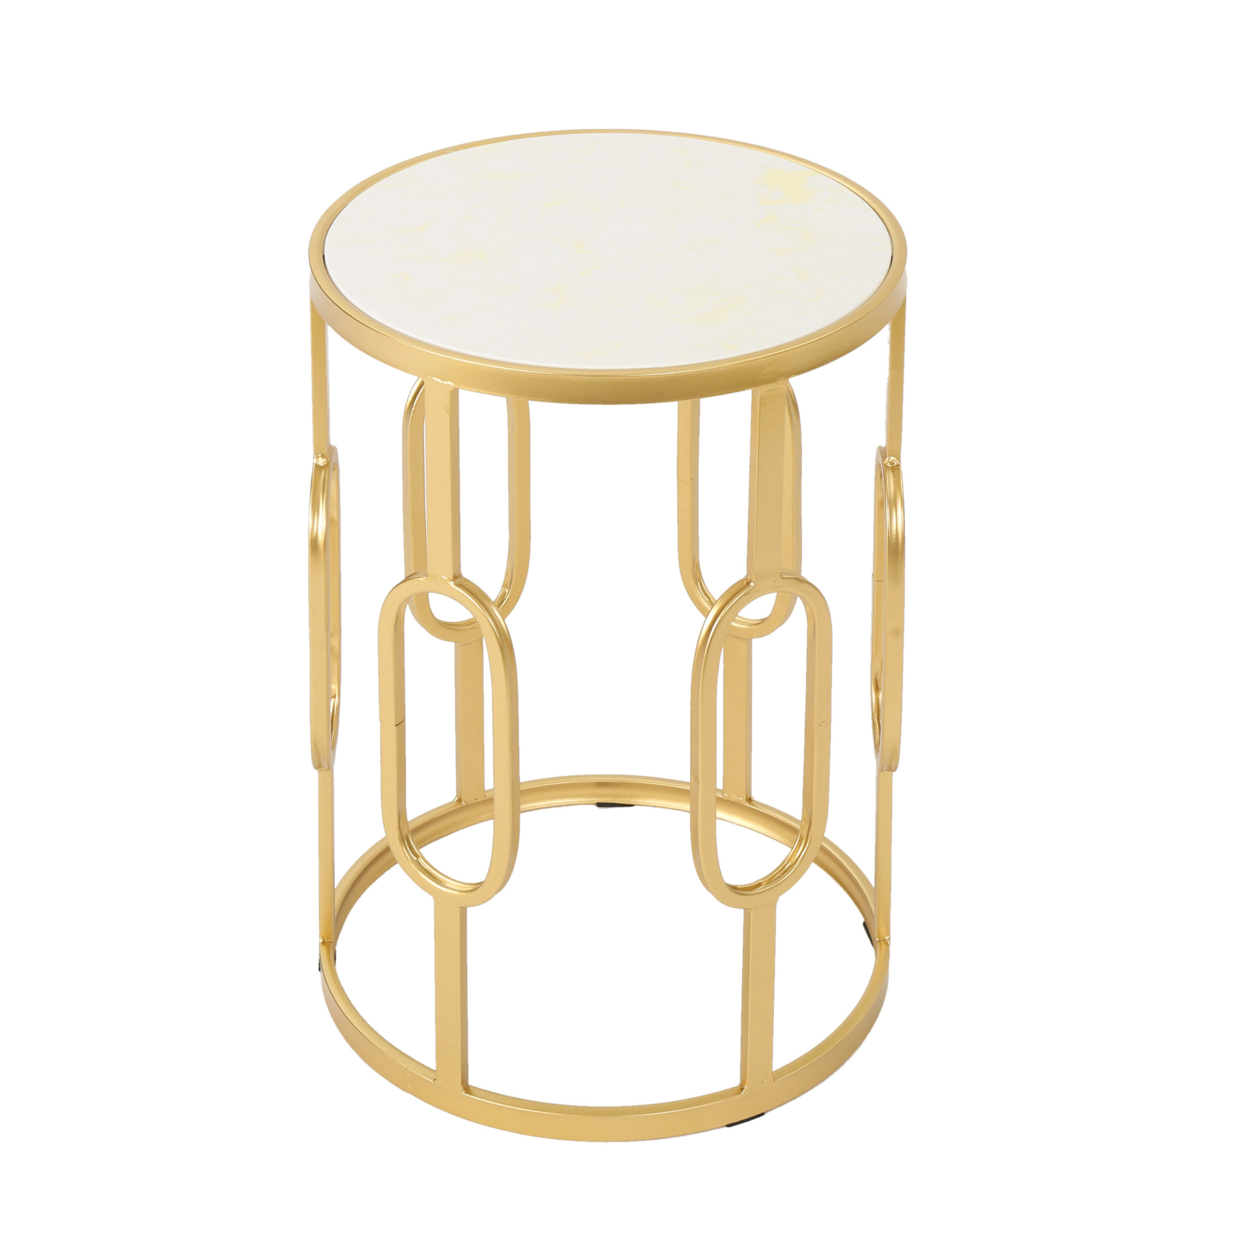 Madison Indoor Glam 16 Inch Side Table, White Finish Faux Stone - image 4 of 7